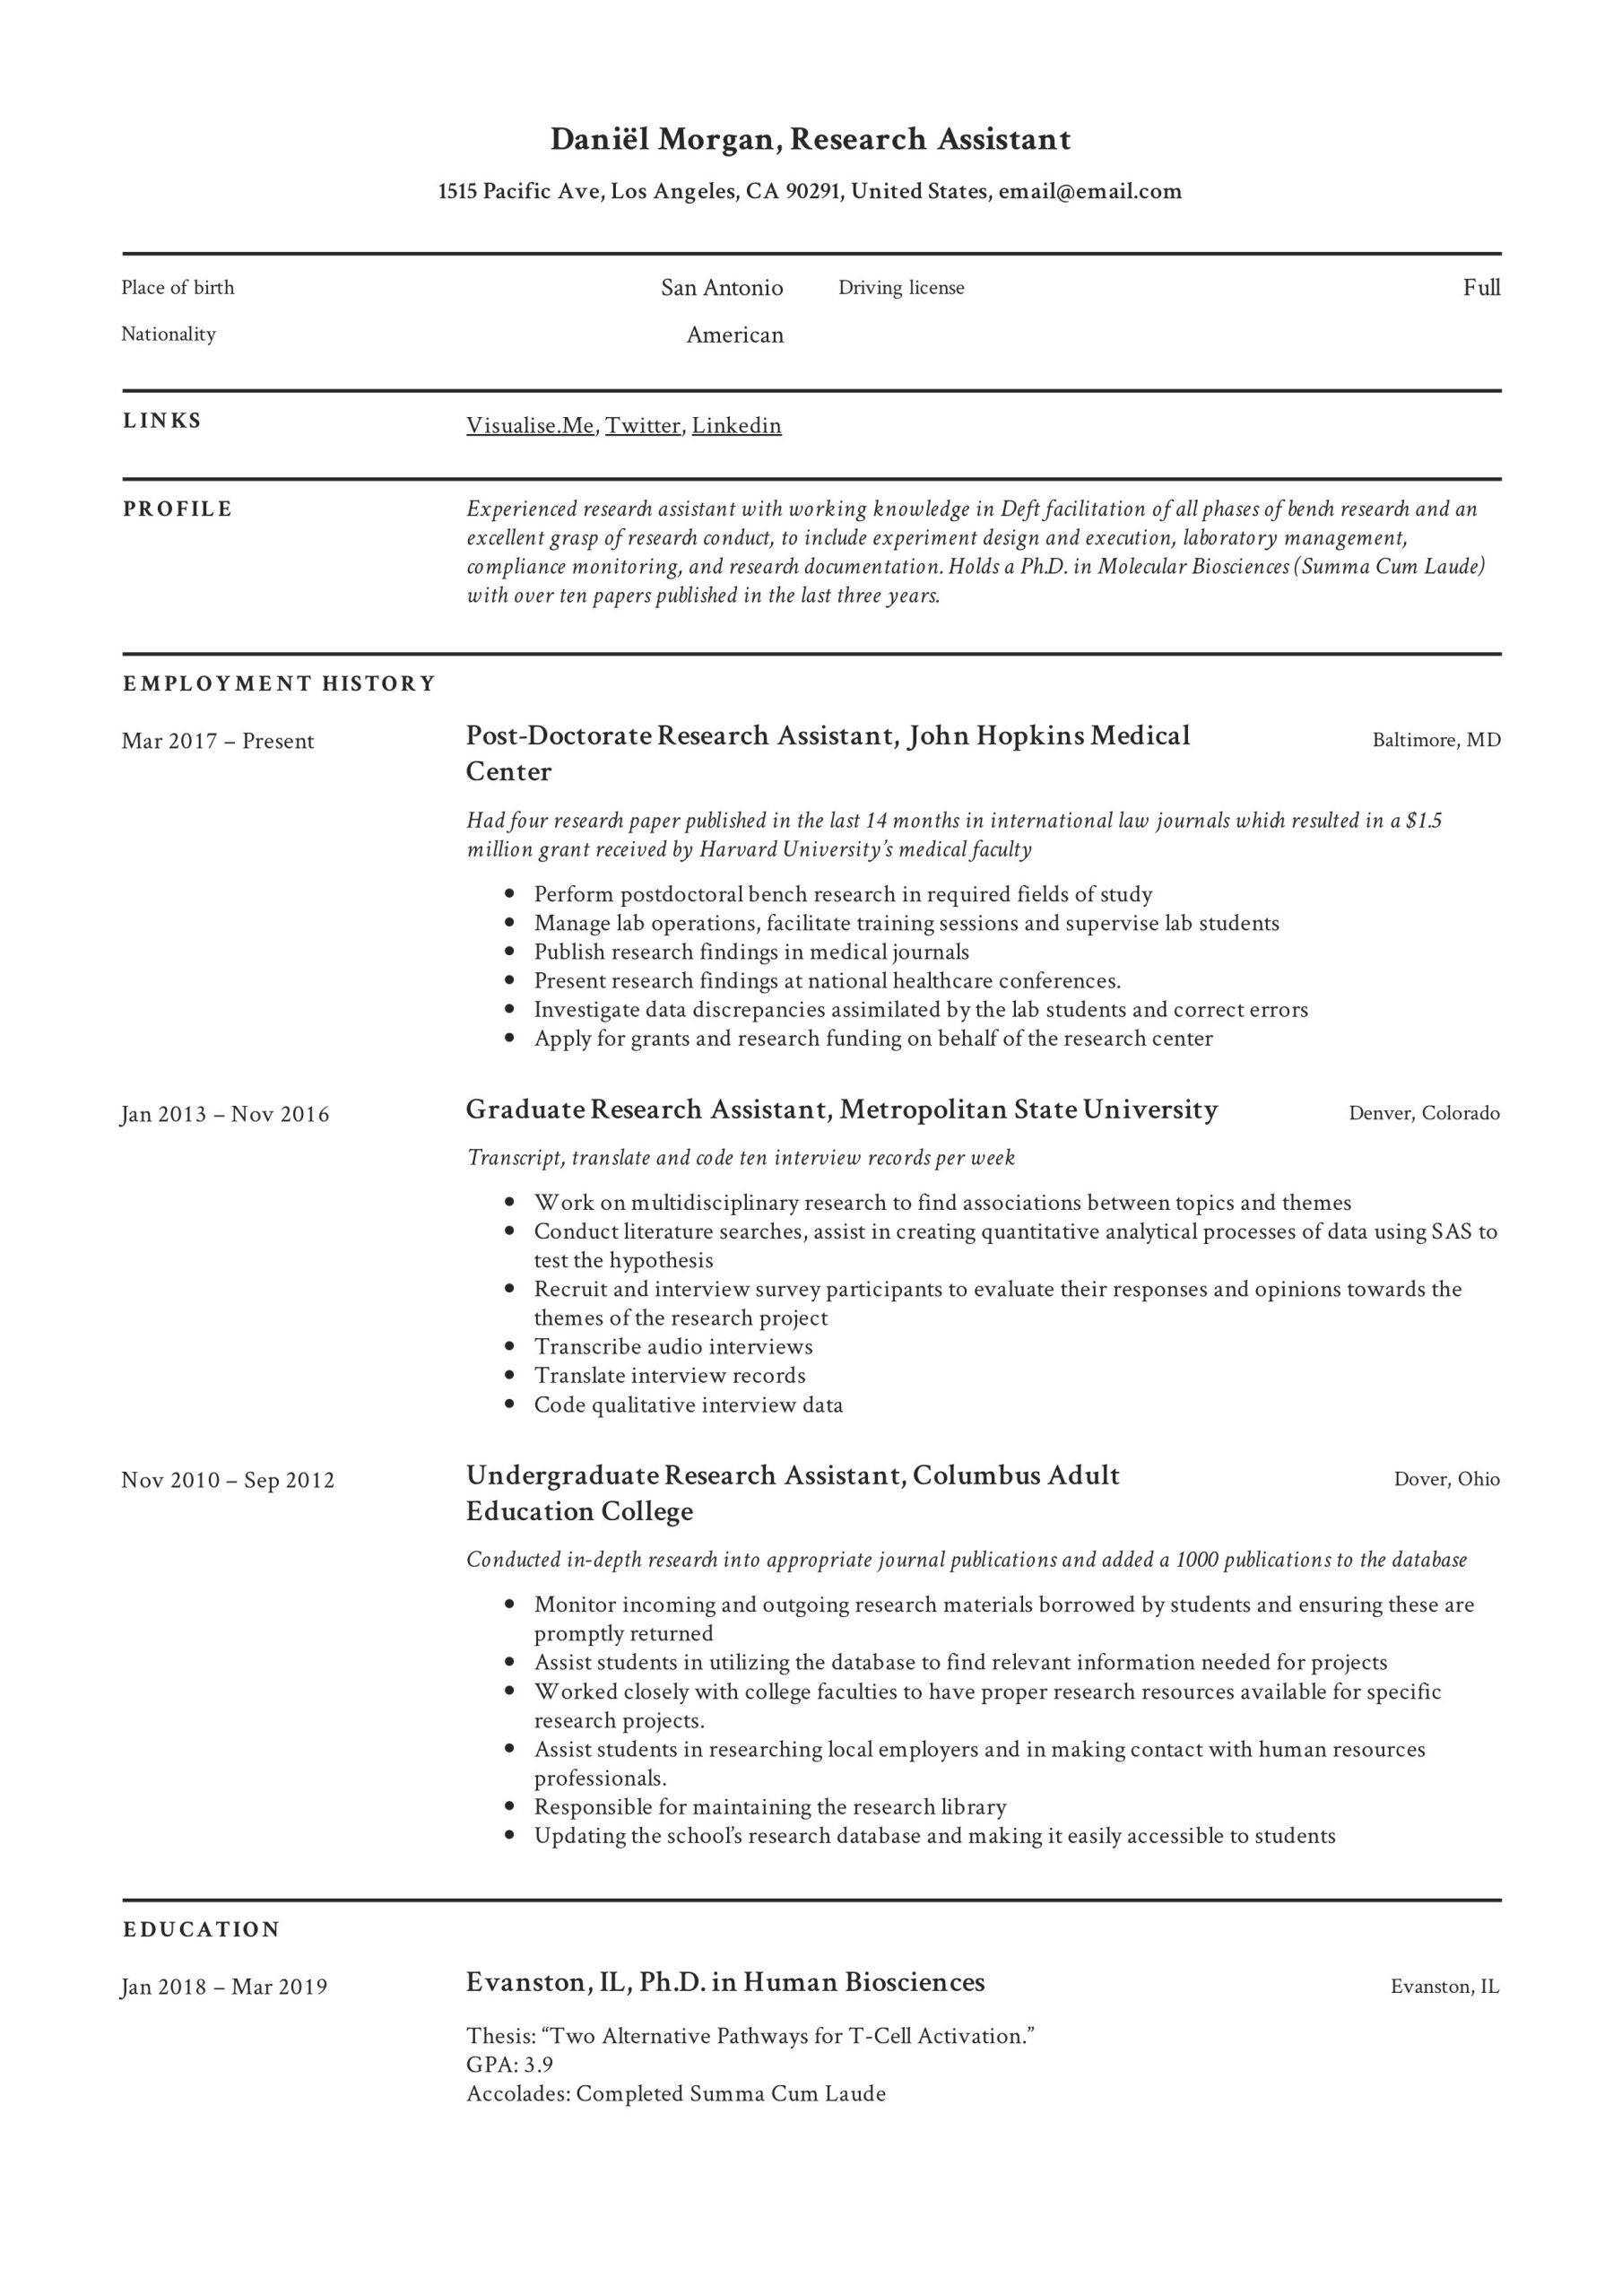 Sample Resume for Undergraduate Research assistant No Experiance Research assistant Resume & Writing Guide  12 Resume Examples